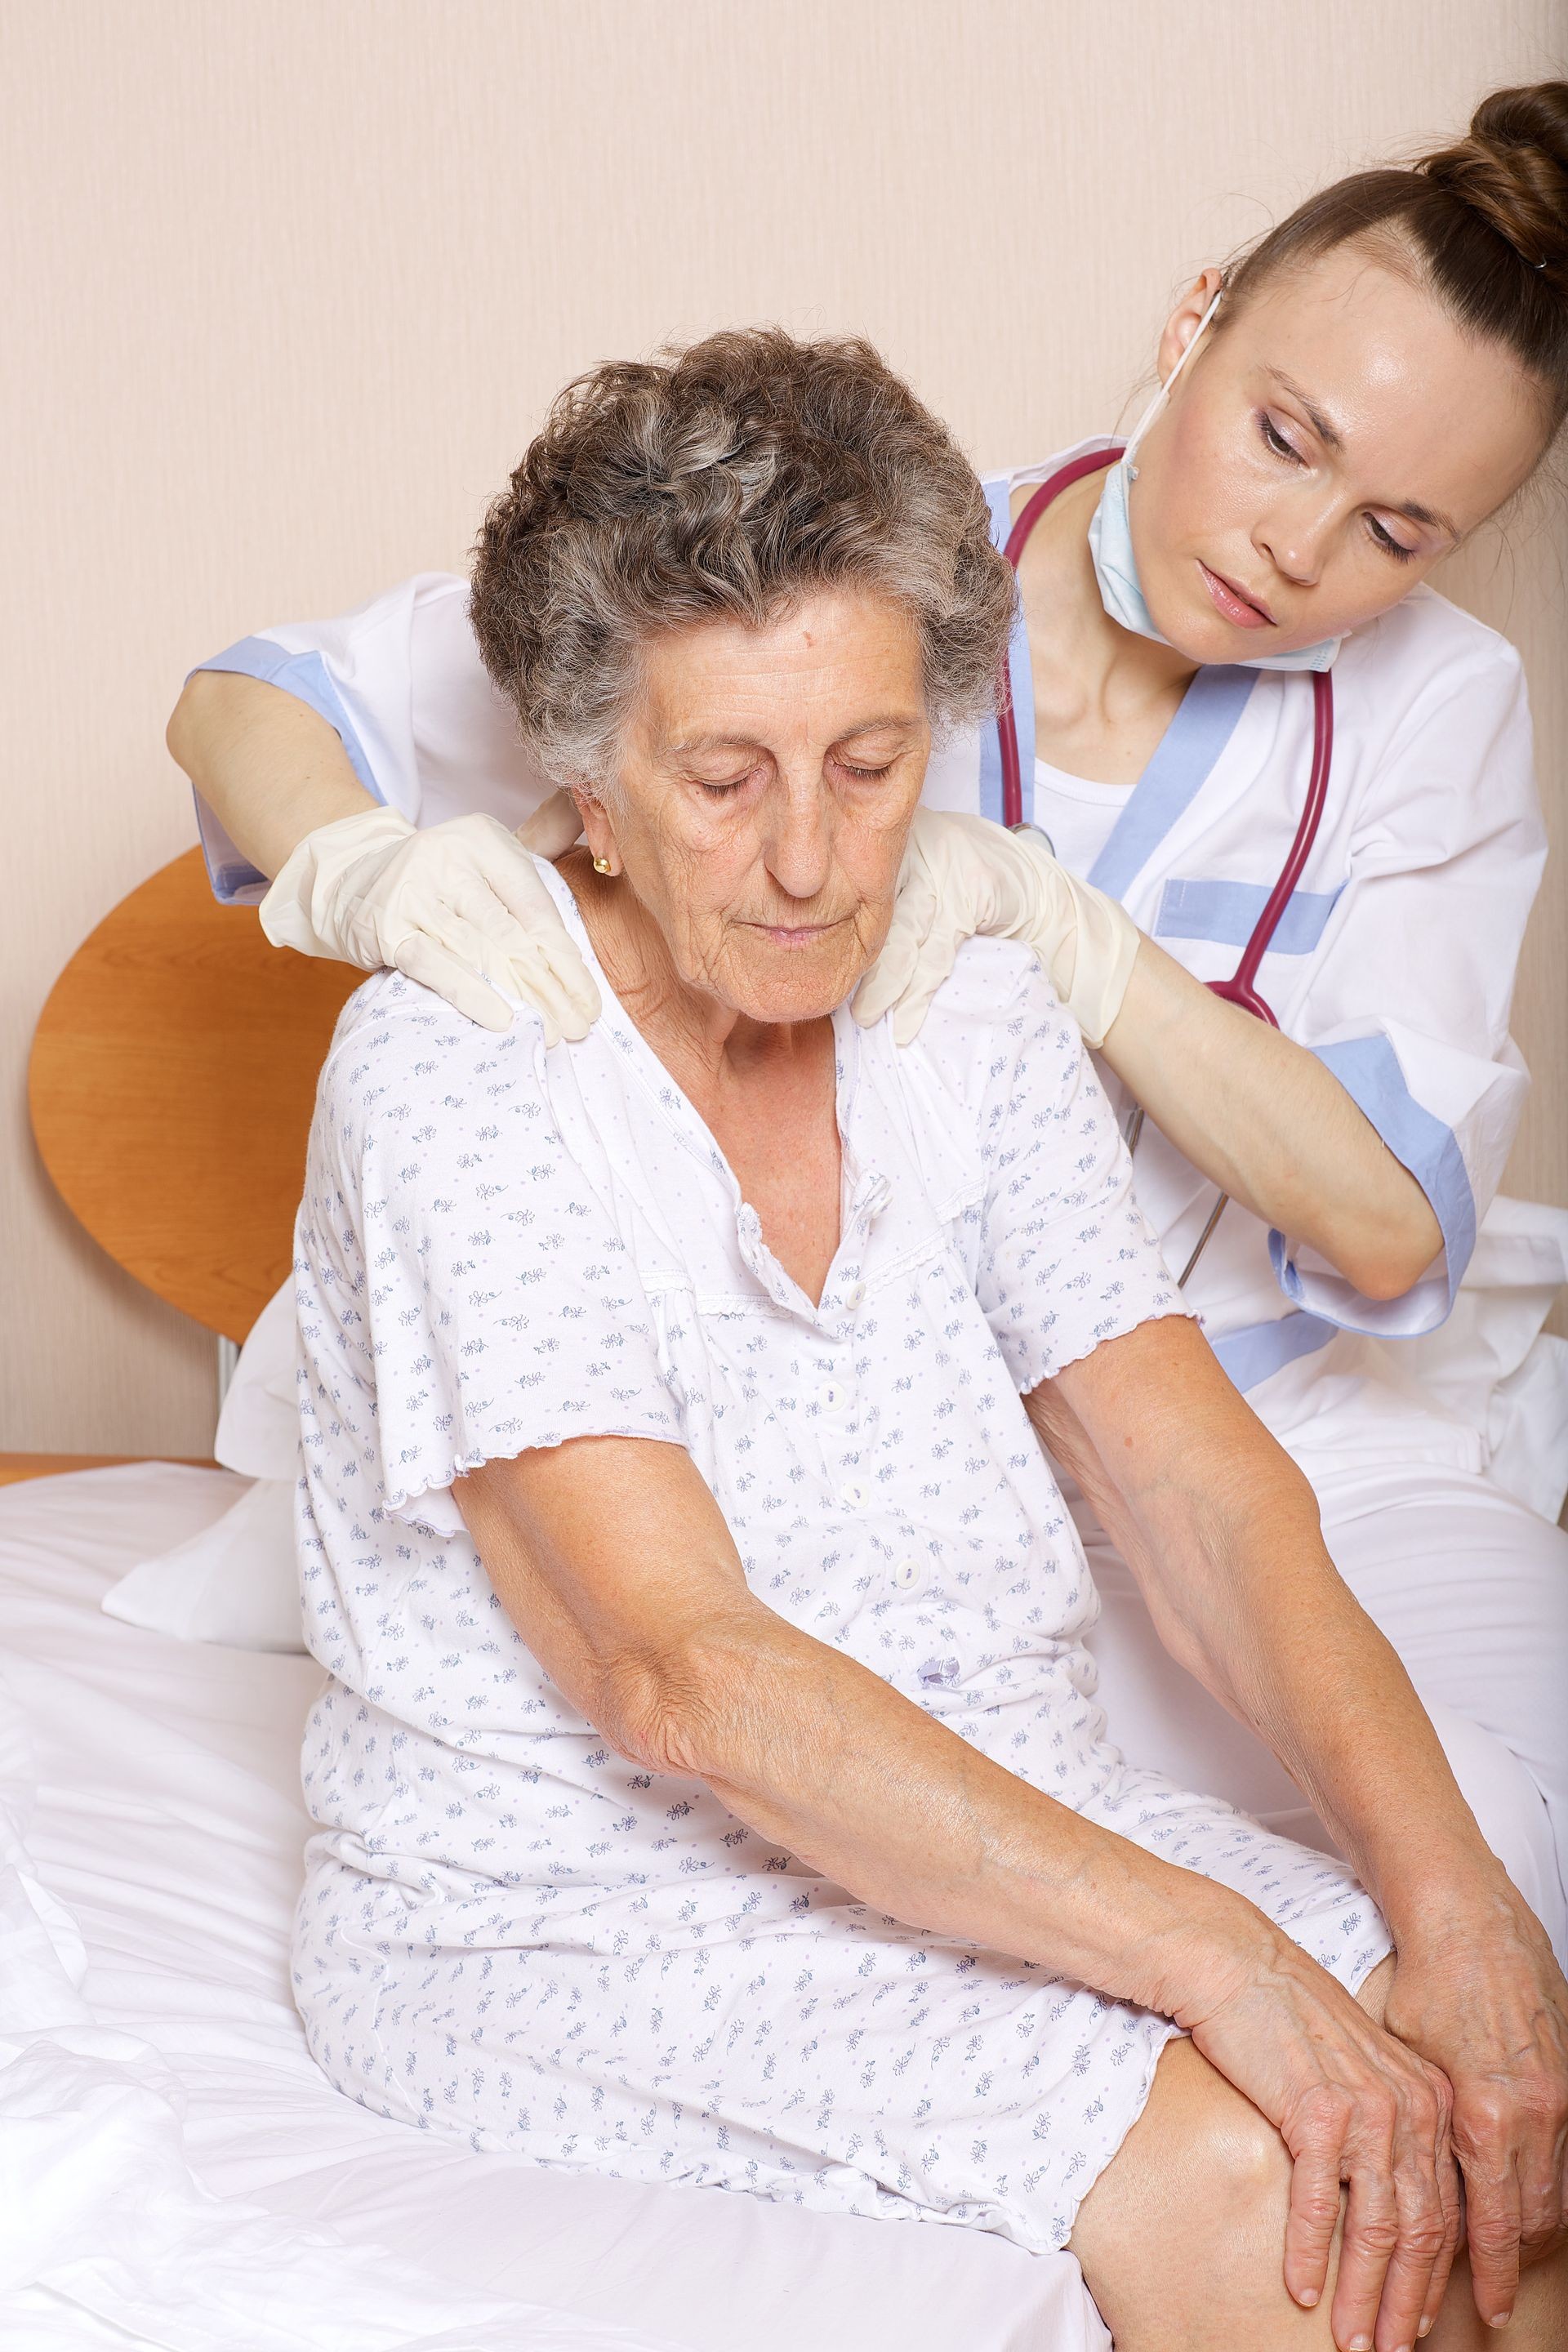 Geriatrician visits a senior woman between 70 and 80 years old in her ward